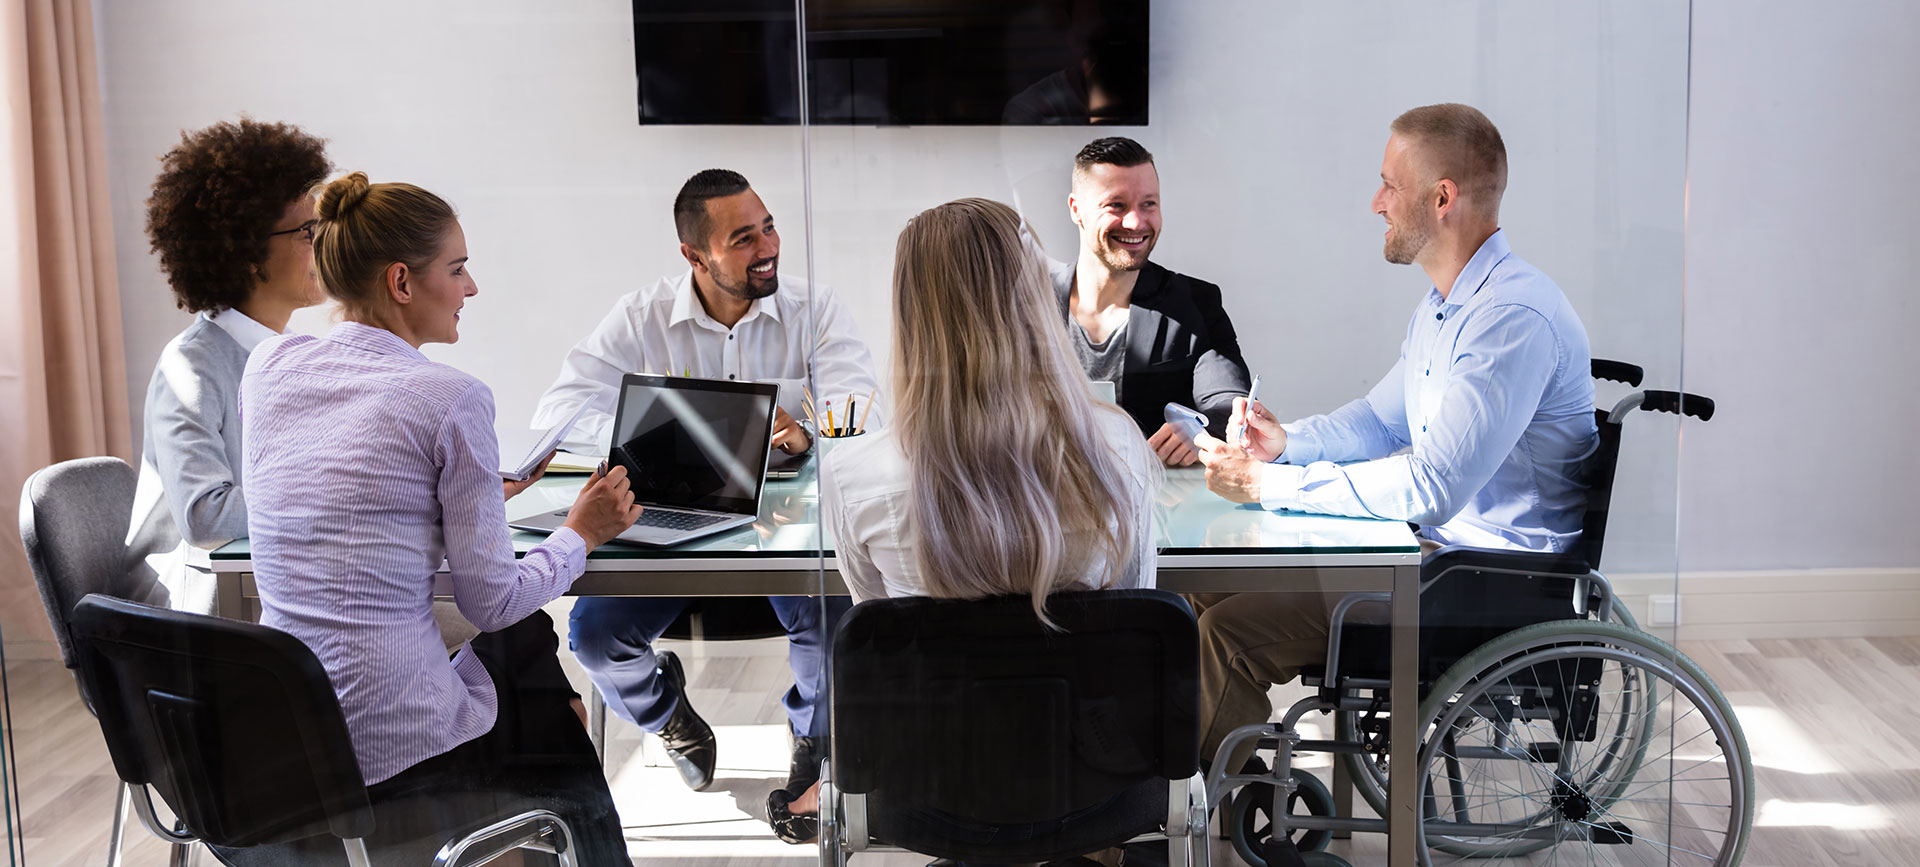 6 people sat around meeting table, having discussions. One person is in a wheelchair.